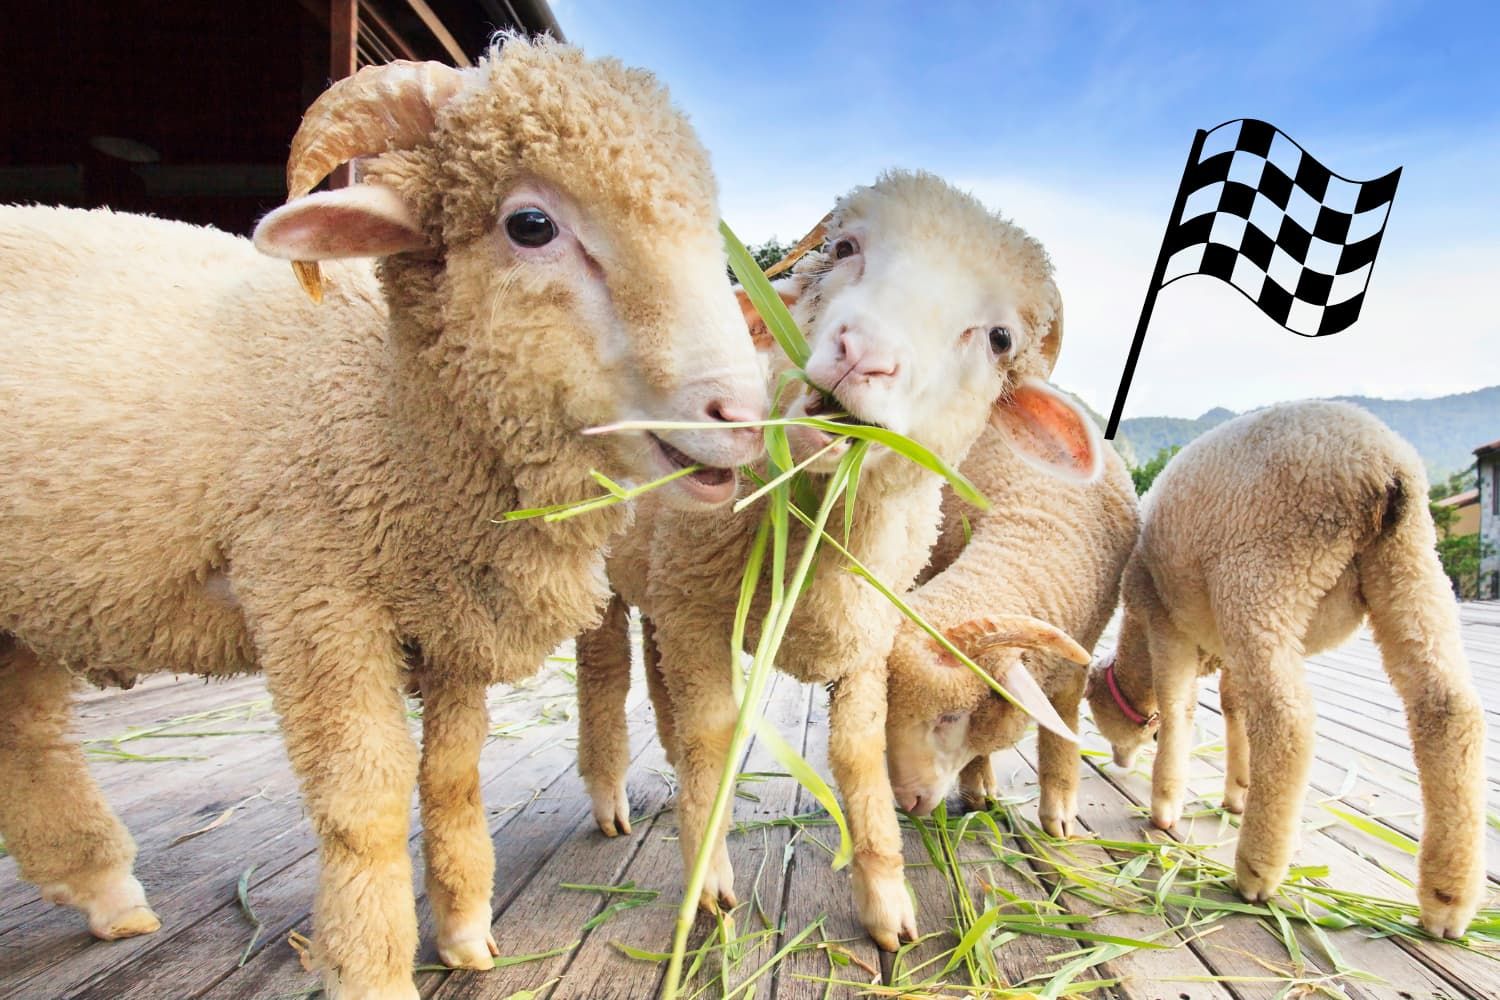 Game%20-%20OT%20Psalm%2023%20-%20The%20feed%20the%20sheep%20relay%20race-6bb58723 Presence of God